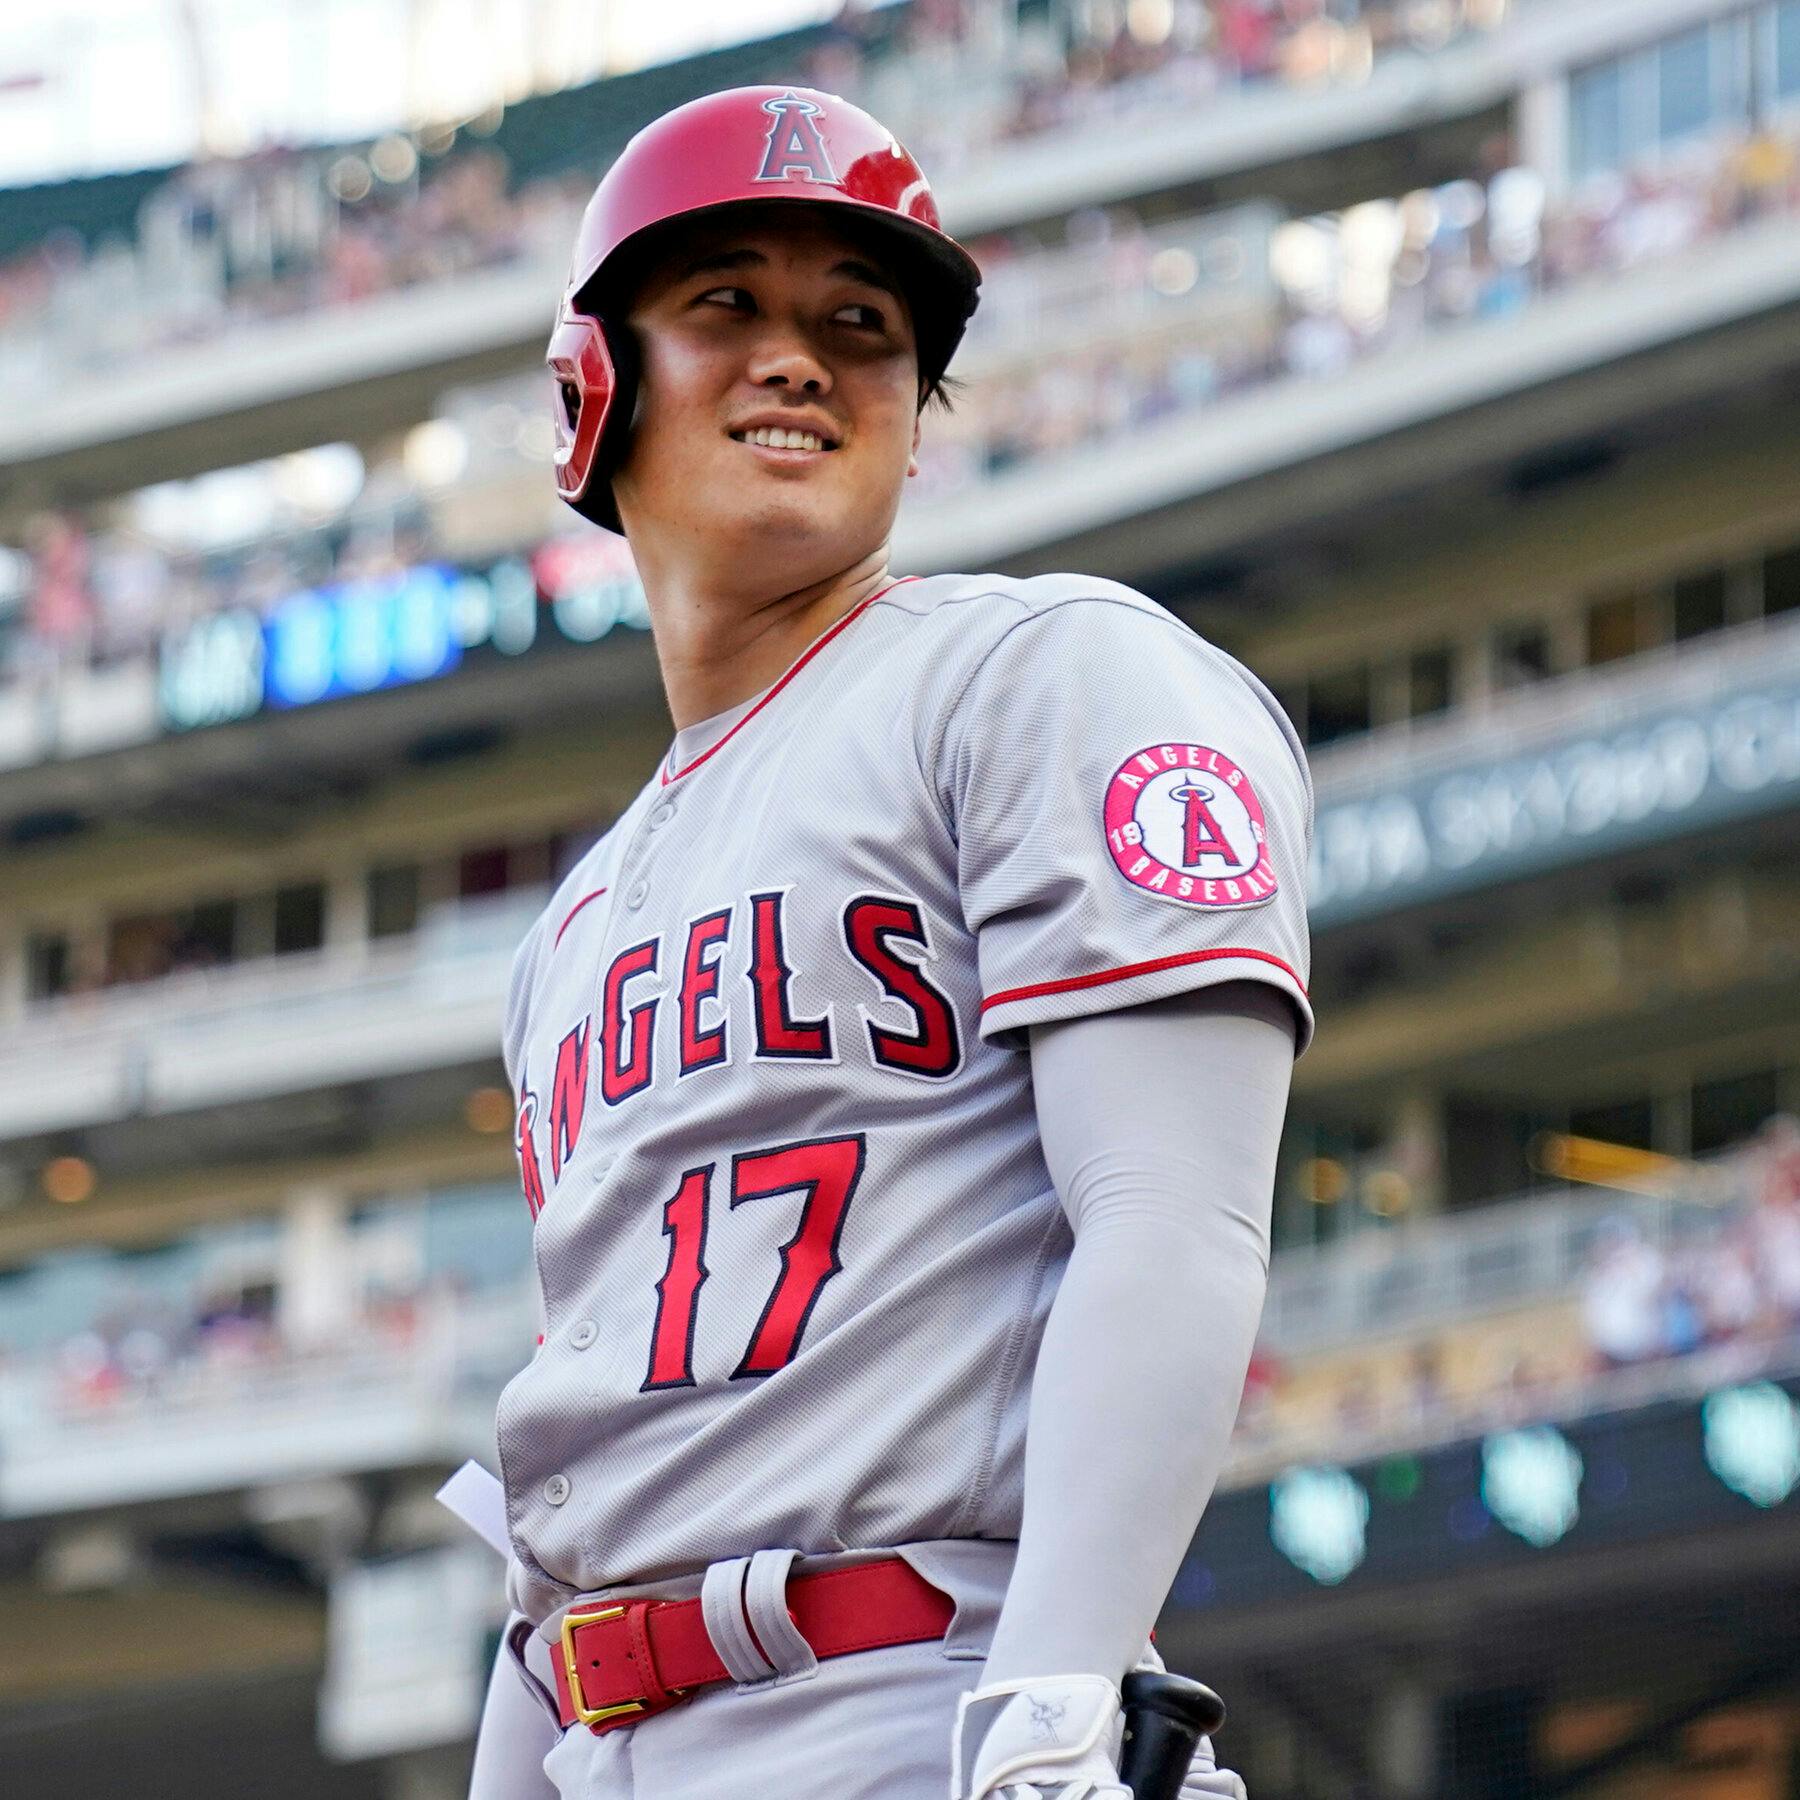 If the Blue Jays push for Shohei Ohtani, would the cost be worth